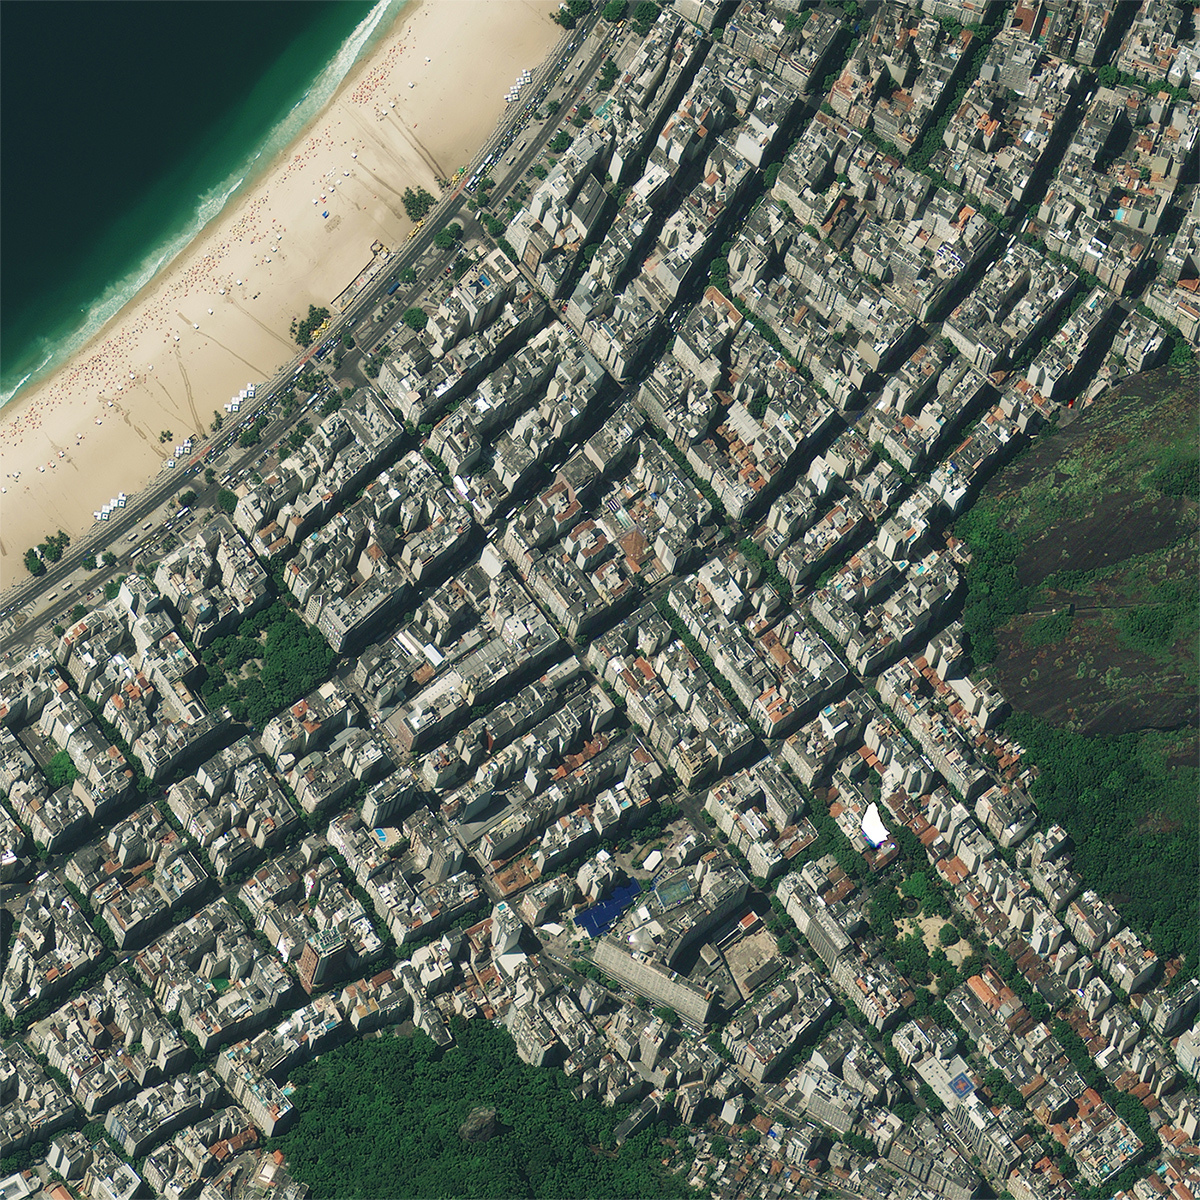 Green infrastructure projects are easily identifiable from satellite data.